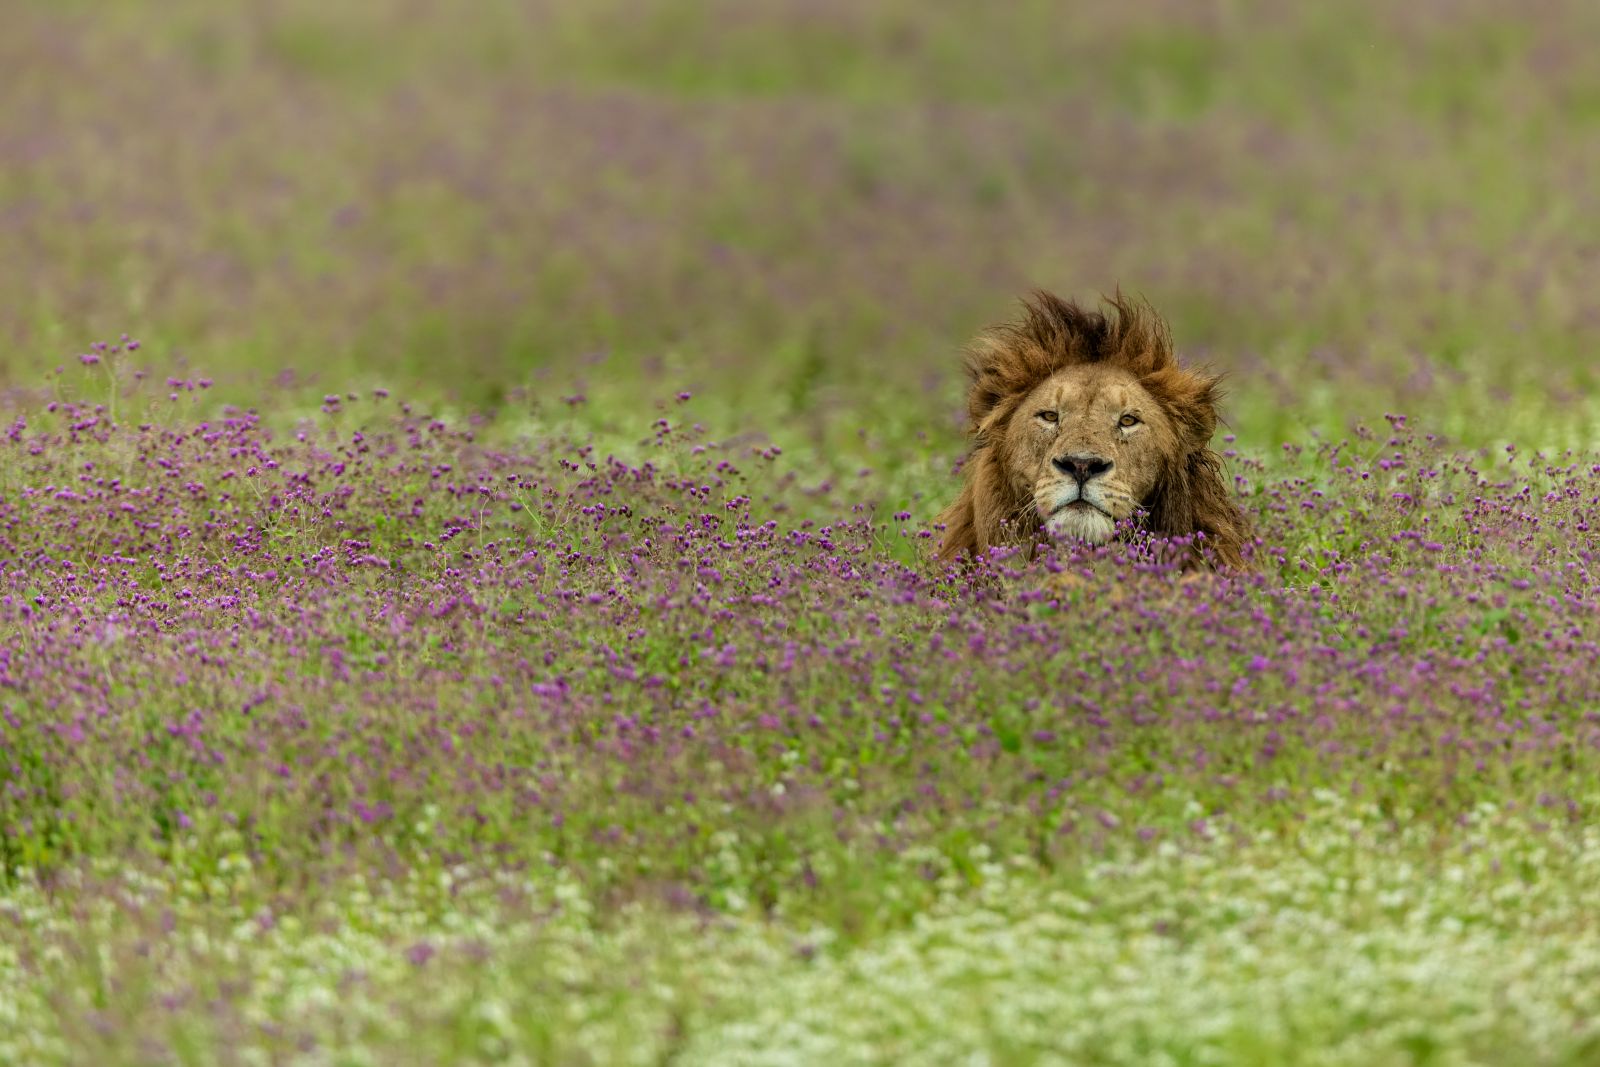 A male lion partially concealed by grasslands in in the Ngorogoro Crater region of Tanzania